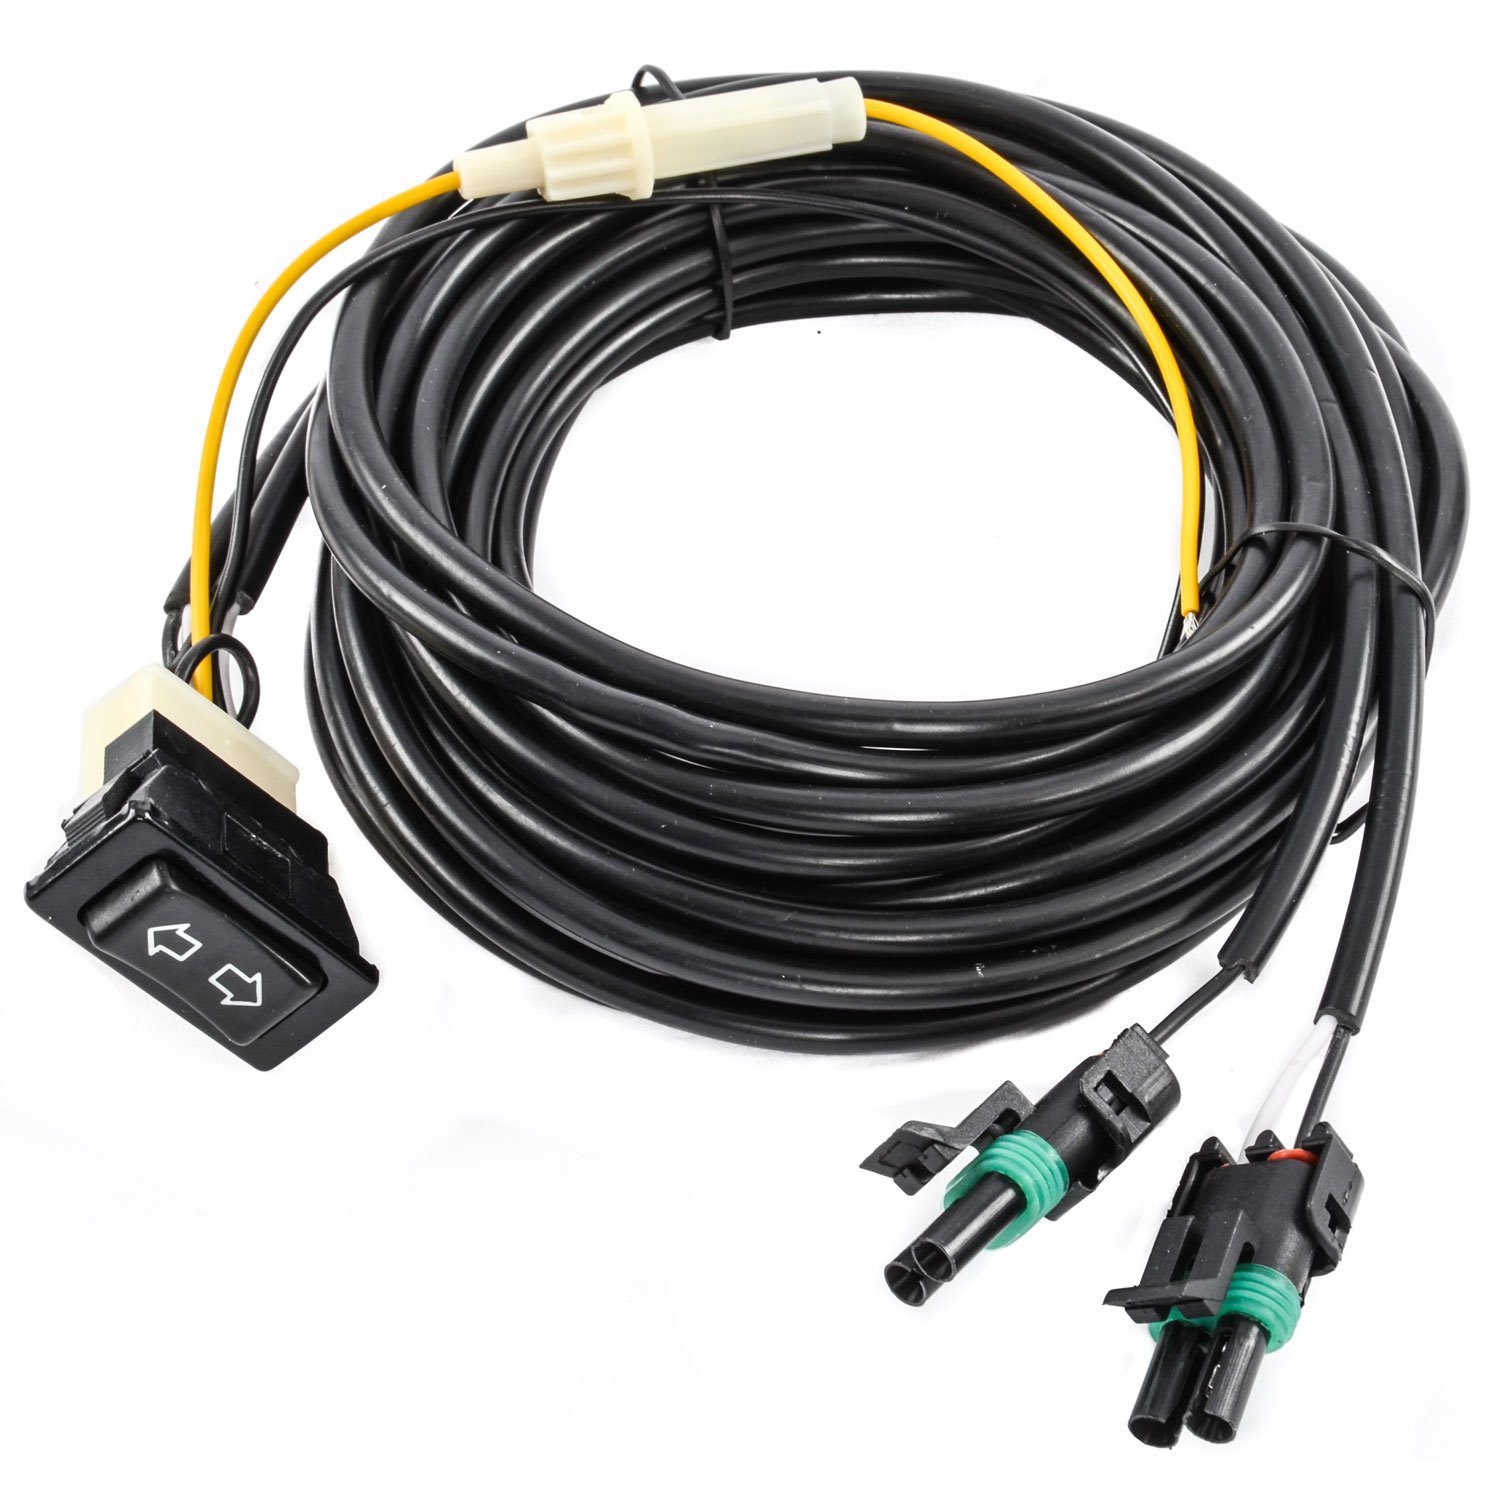 Replacement 15 ft. Wiring Harness and Switch Fits JEGS Dual Exhaust Cutouts 555-30881 and 555-30883